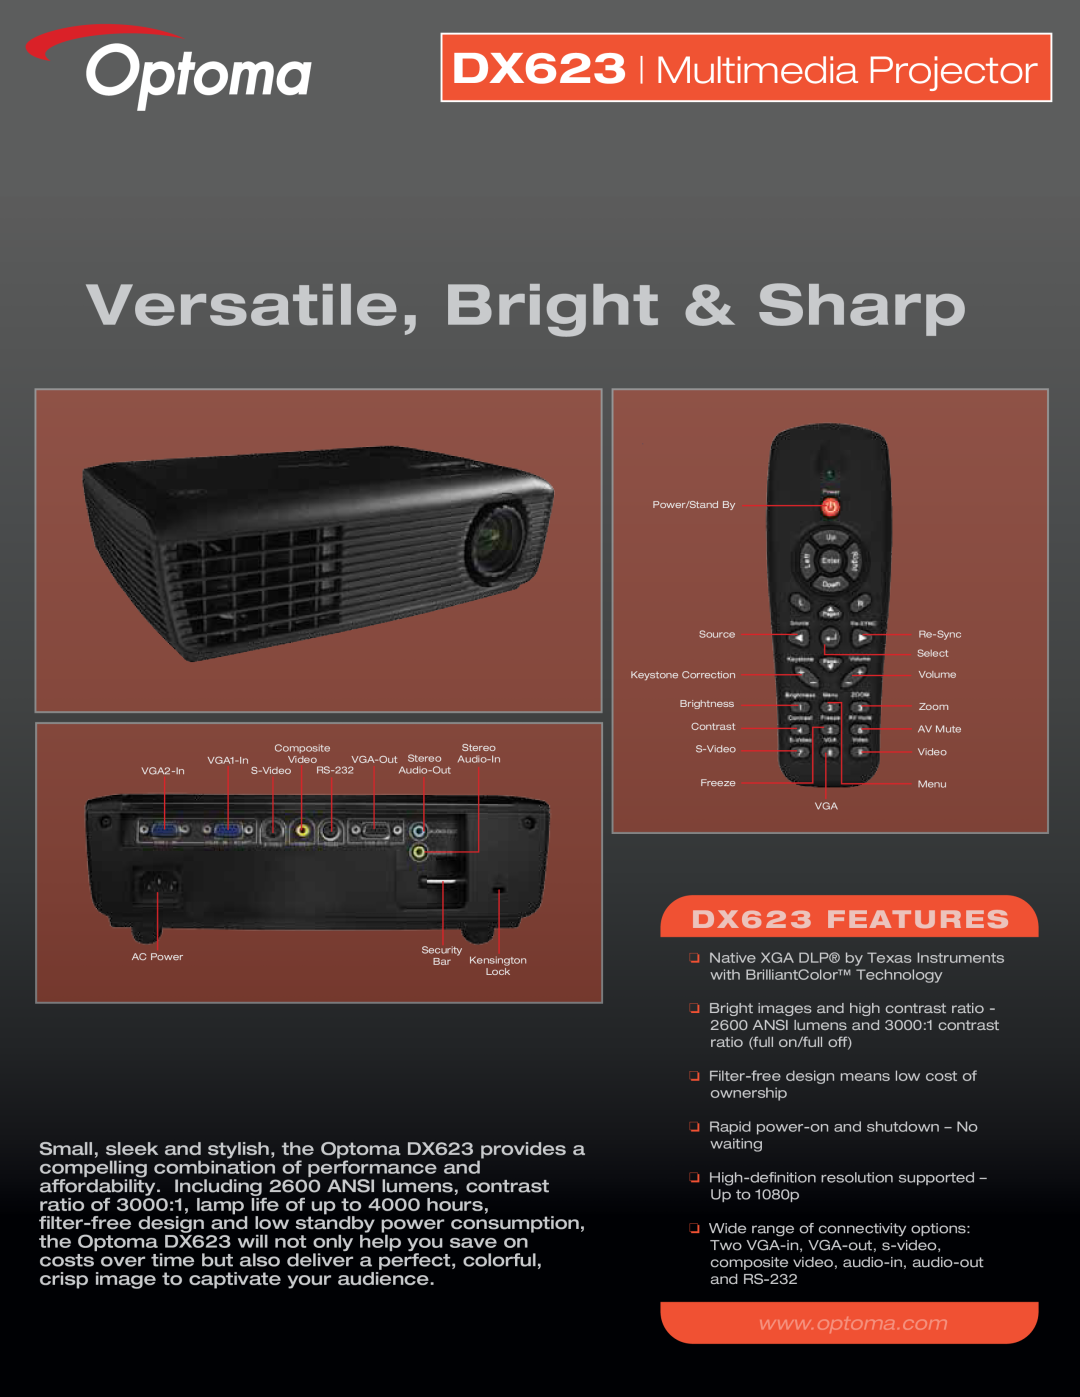 Optoma Technology manual DX623 Multimedia Projector, Versatile, Bright & Sharp, DX623 FEATURES 